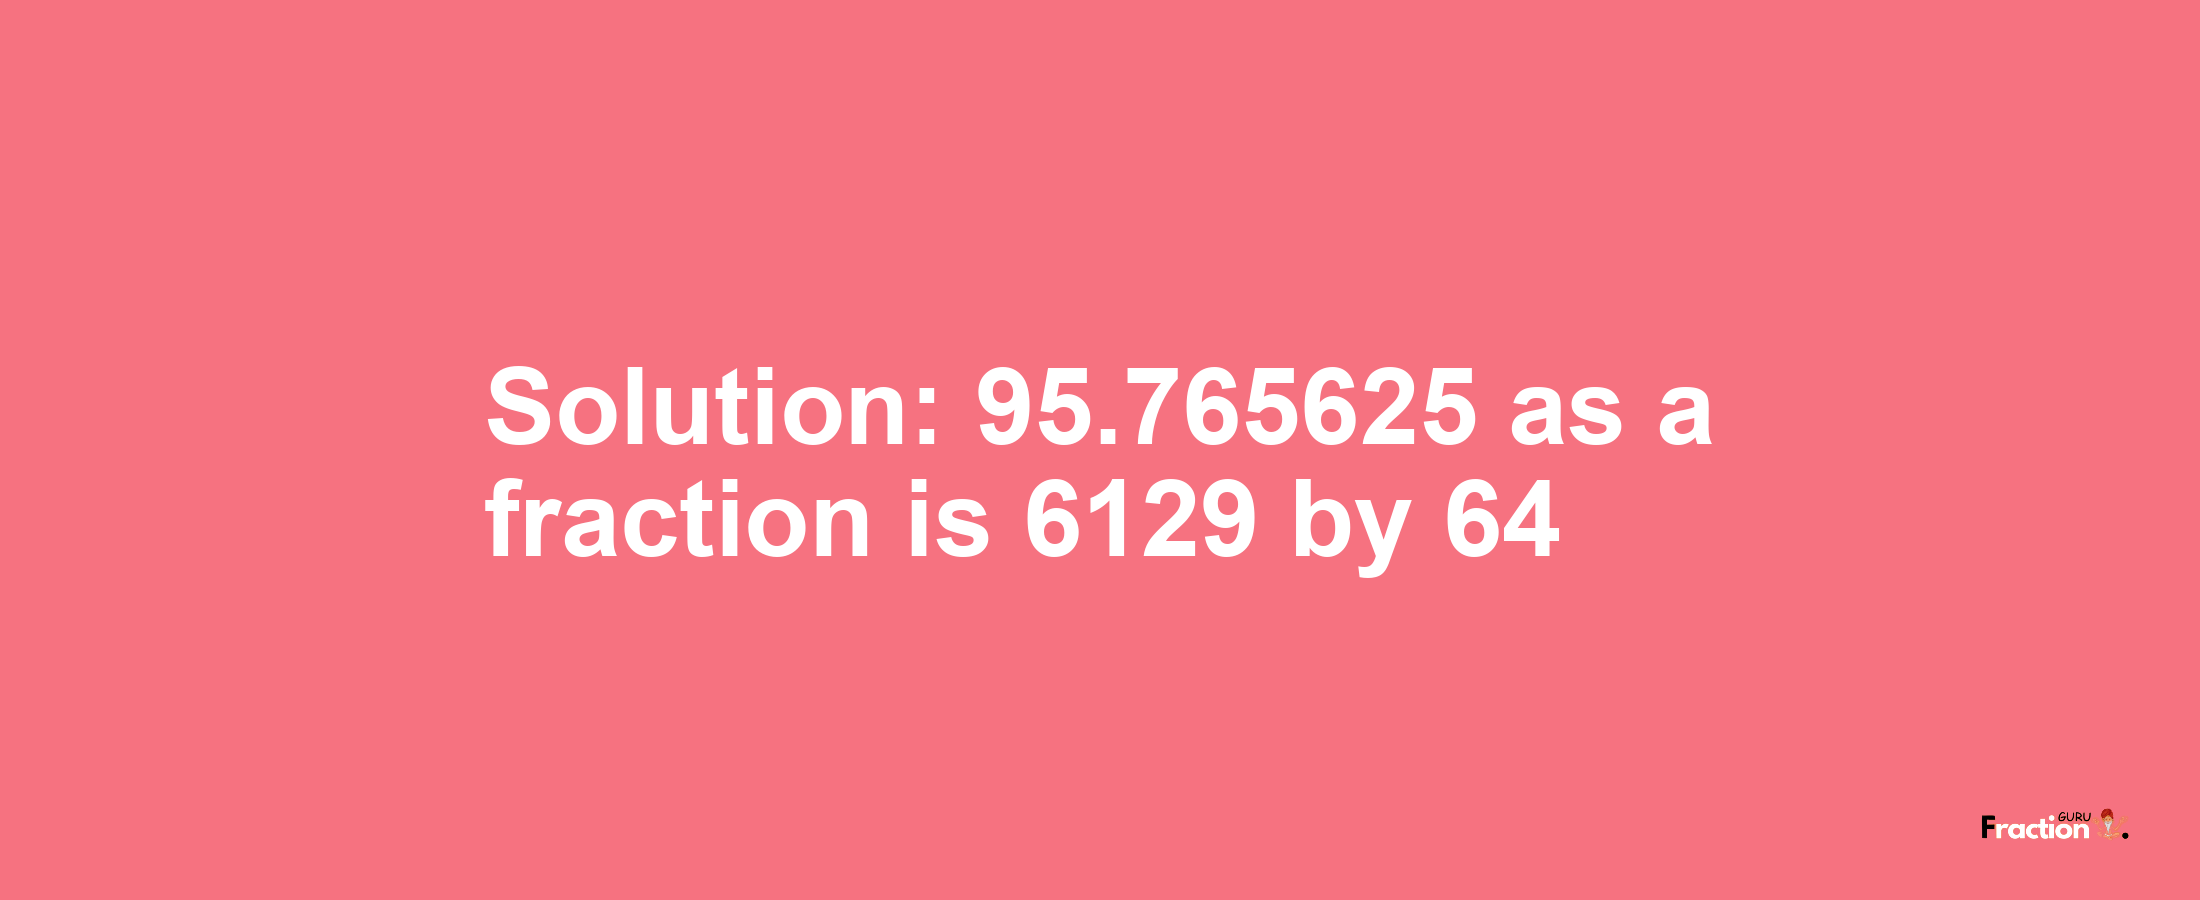 Solution:95.765625 as a fraction is 6129/64